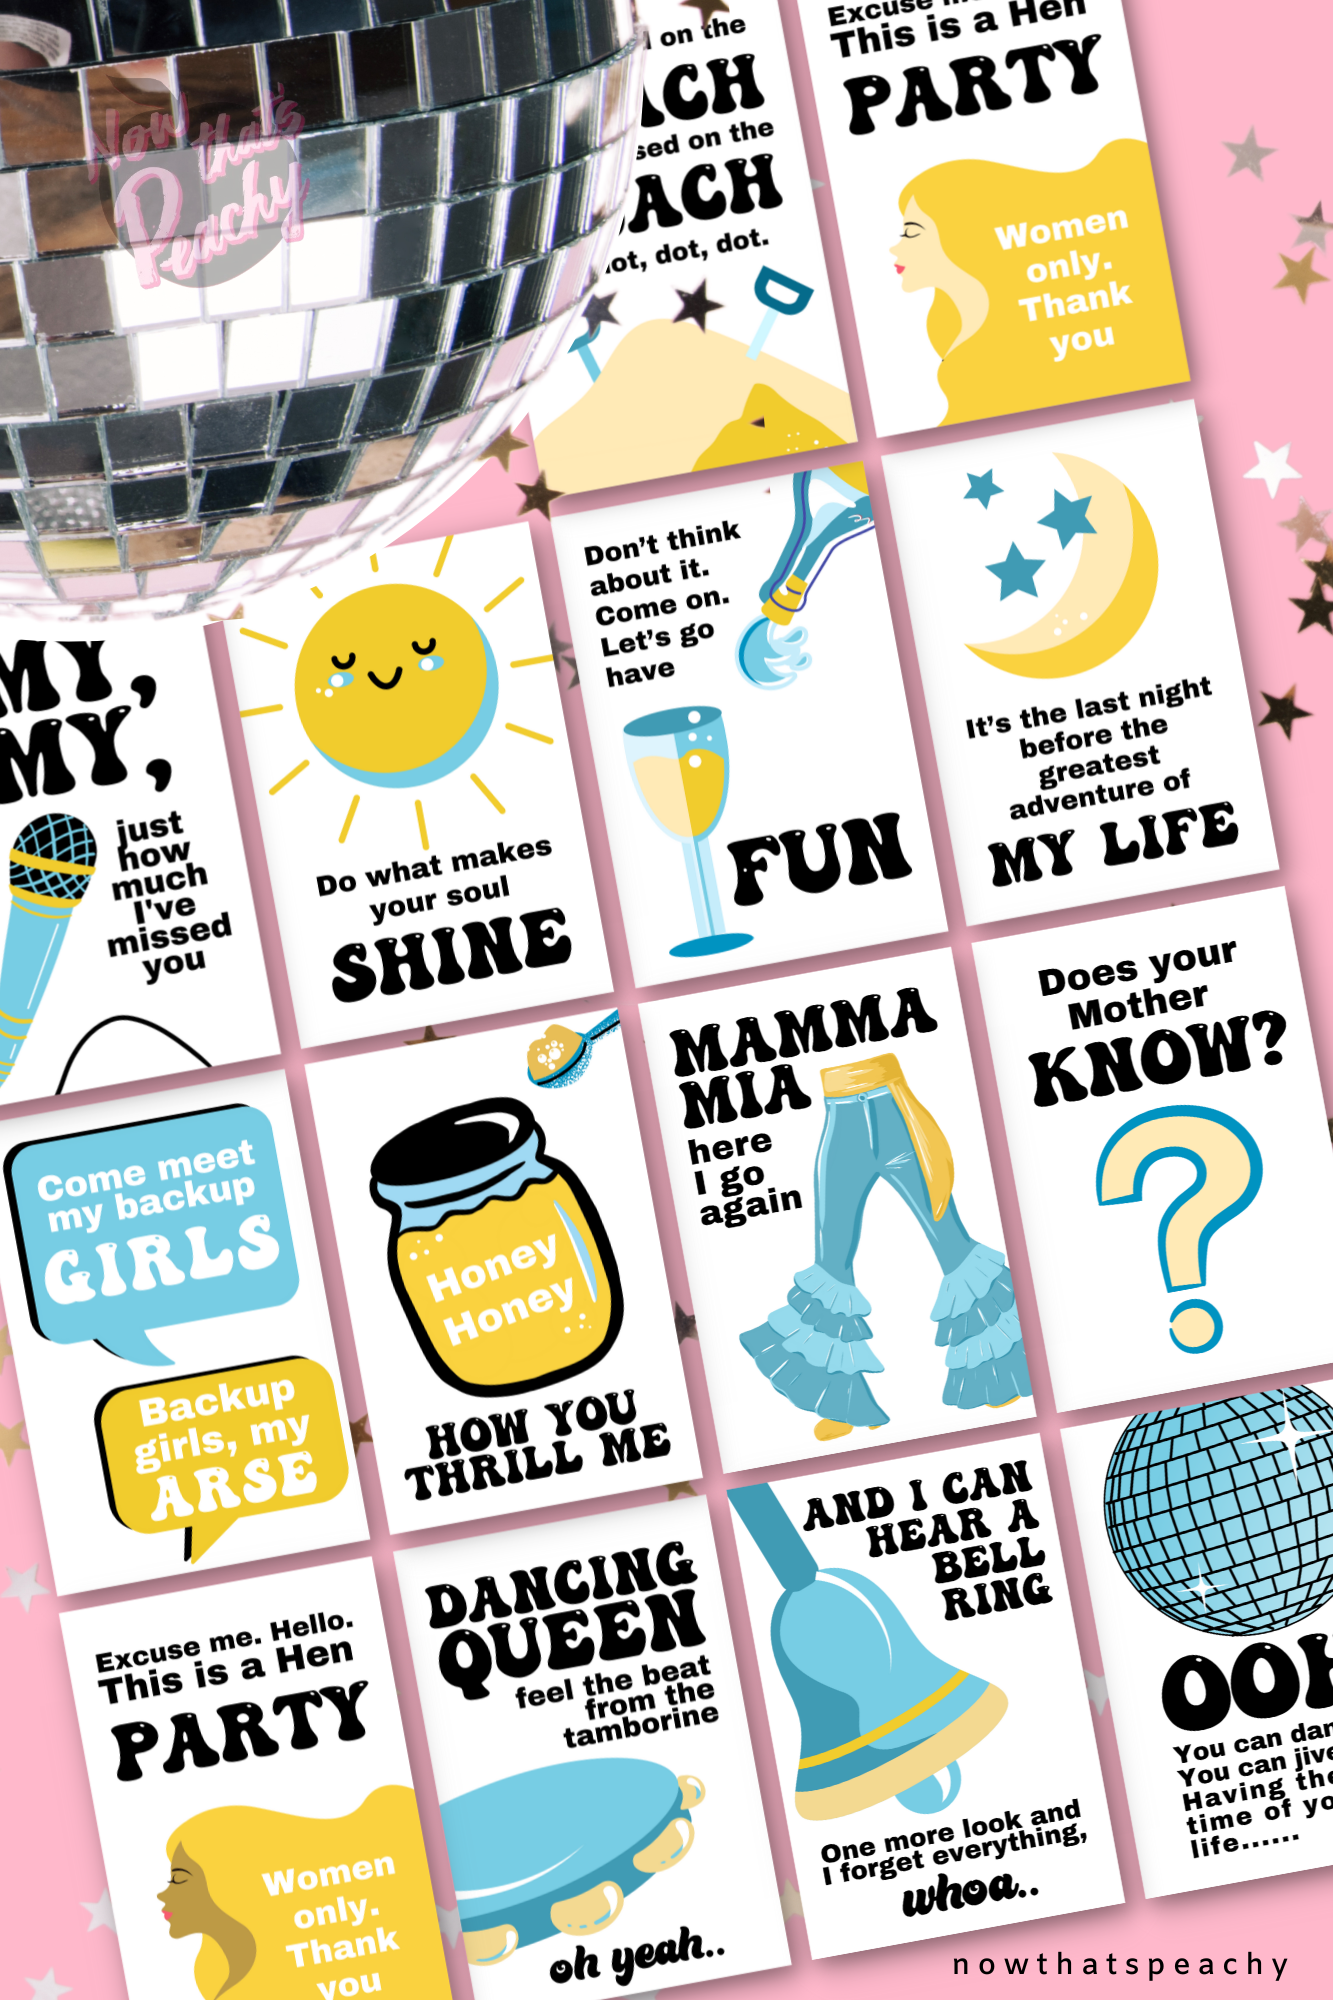 Mamma Mia posters party photobooth photo booth character decorations decor print outs1970s seventies 70's disco ball karaoke  printable template digital instant download edit Donna and the dynamos DIY custom musical movie design hand drawn fan art modern color themed bachelorette birthday charity fundraiser event fun